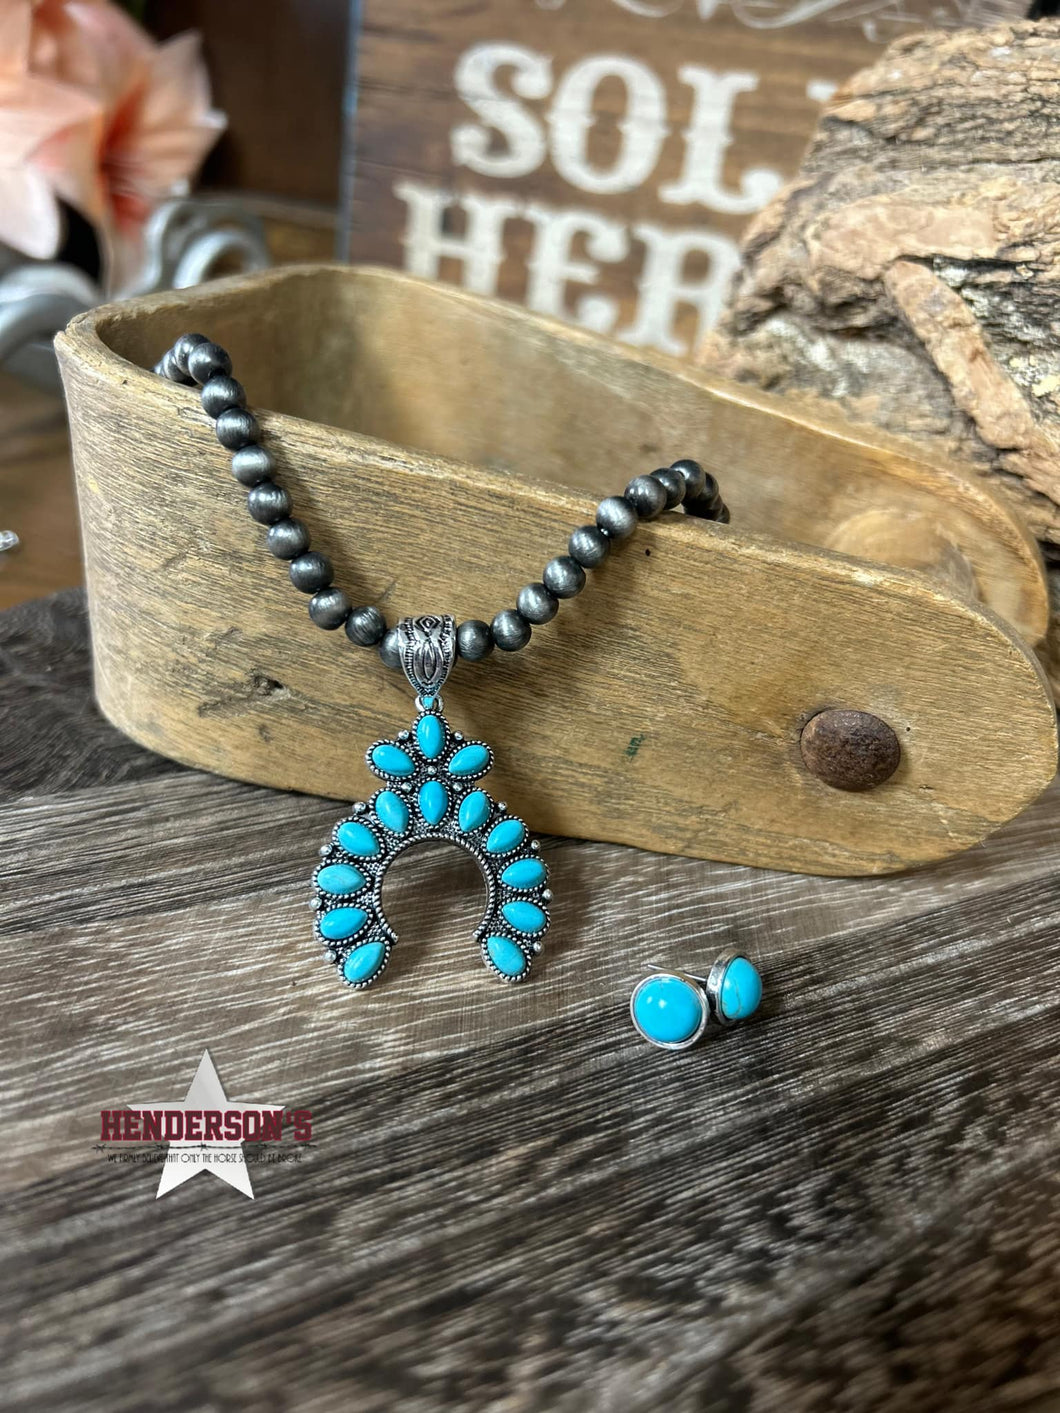 Navajo Beads Squash Blossom Necklace Set - Henderson's Western Store